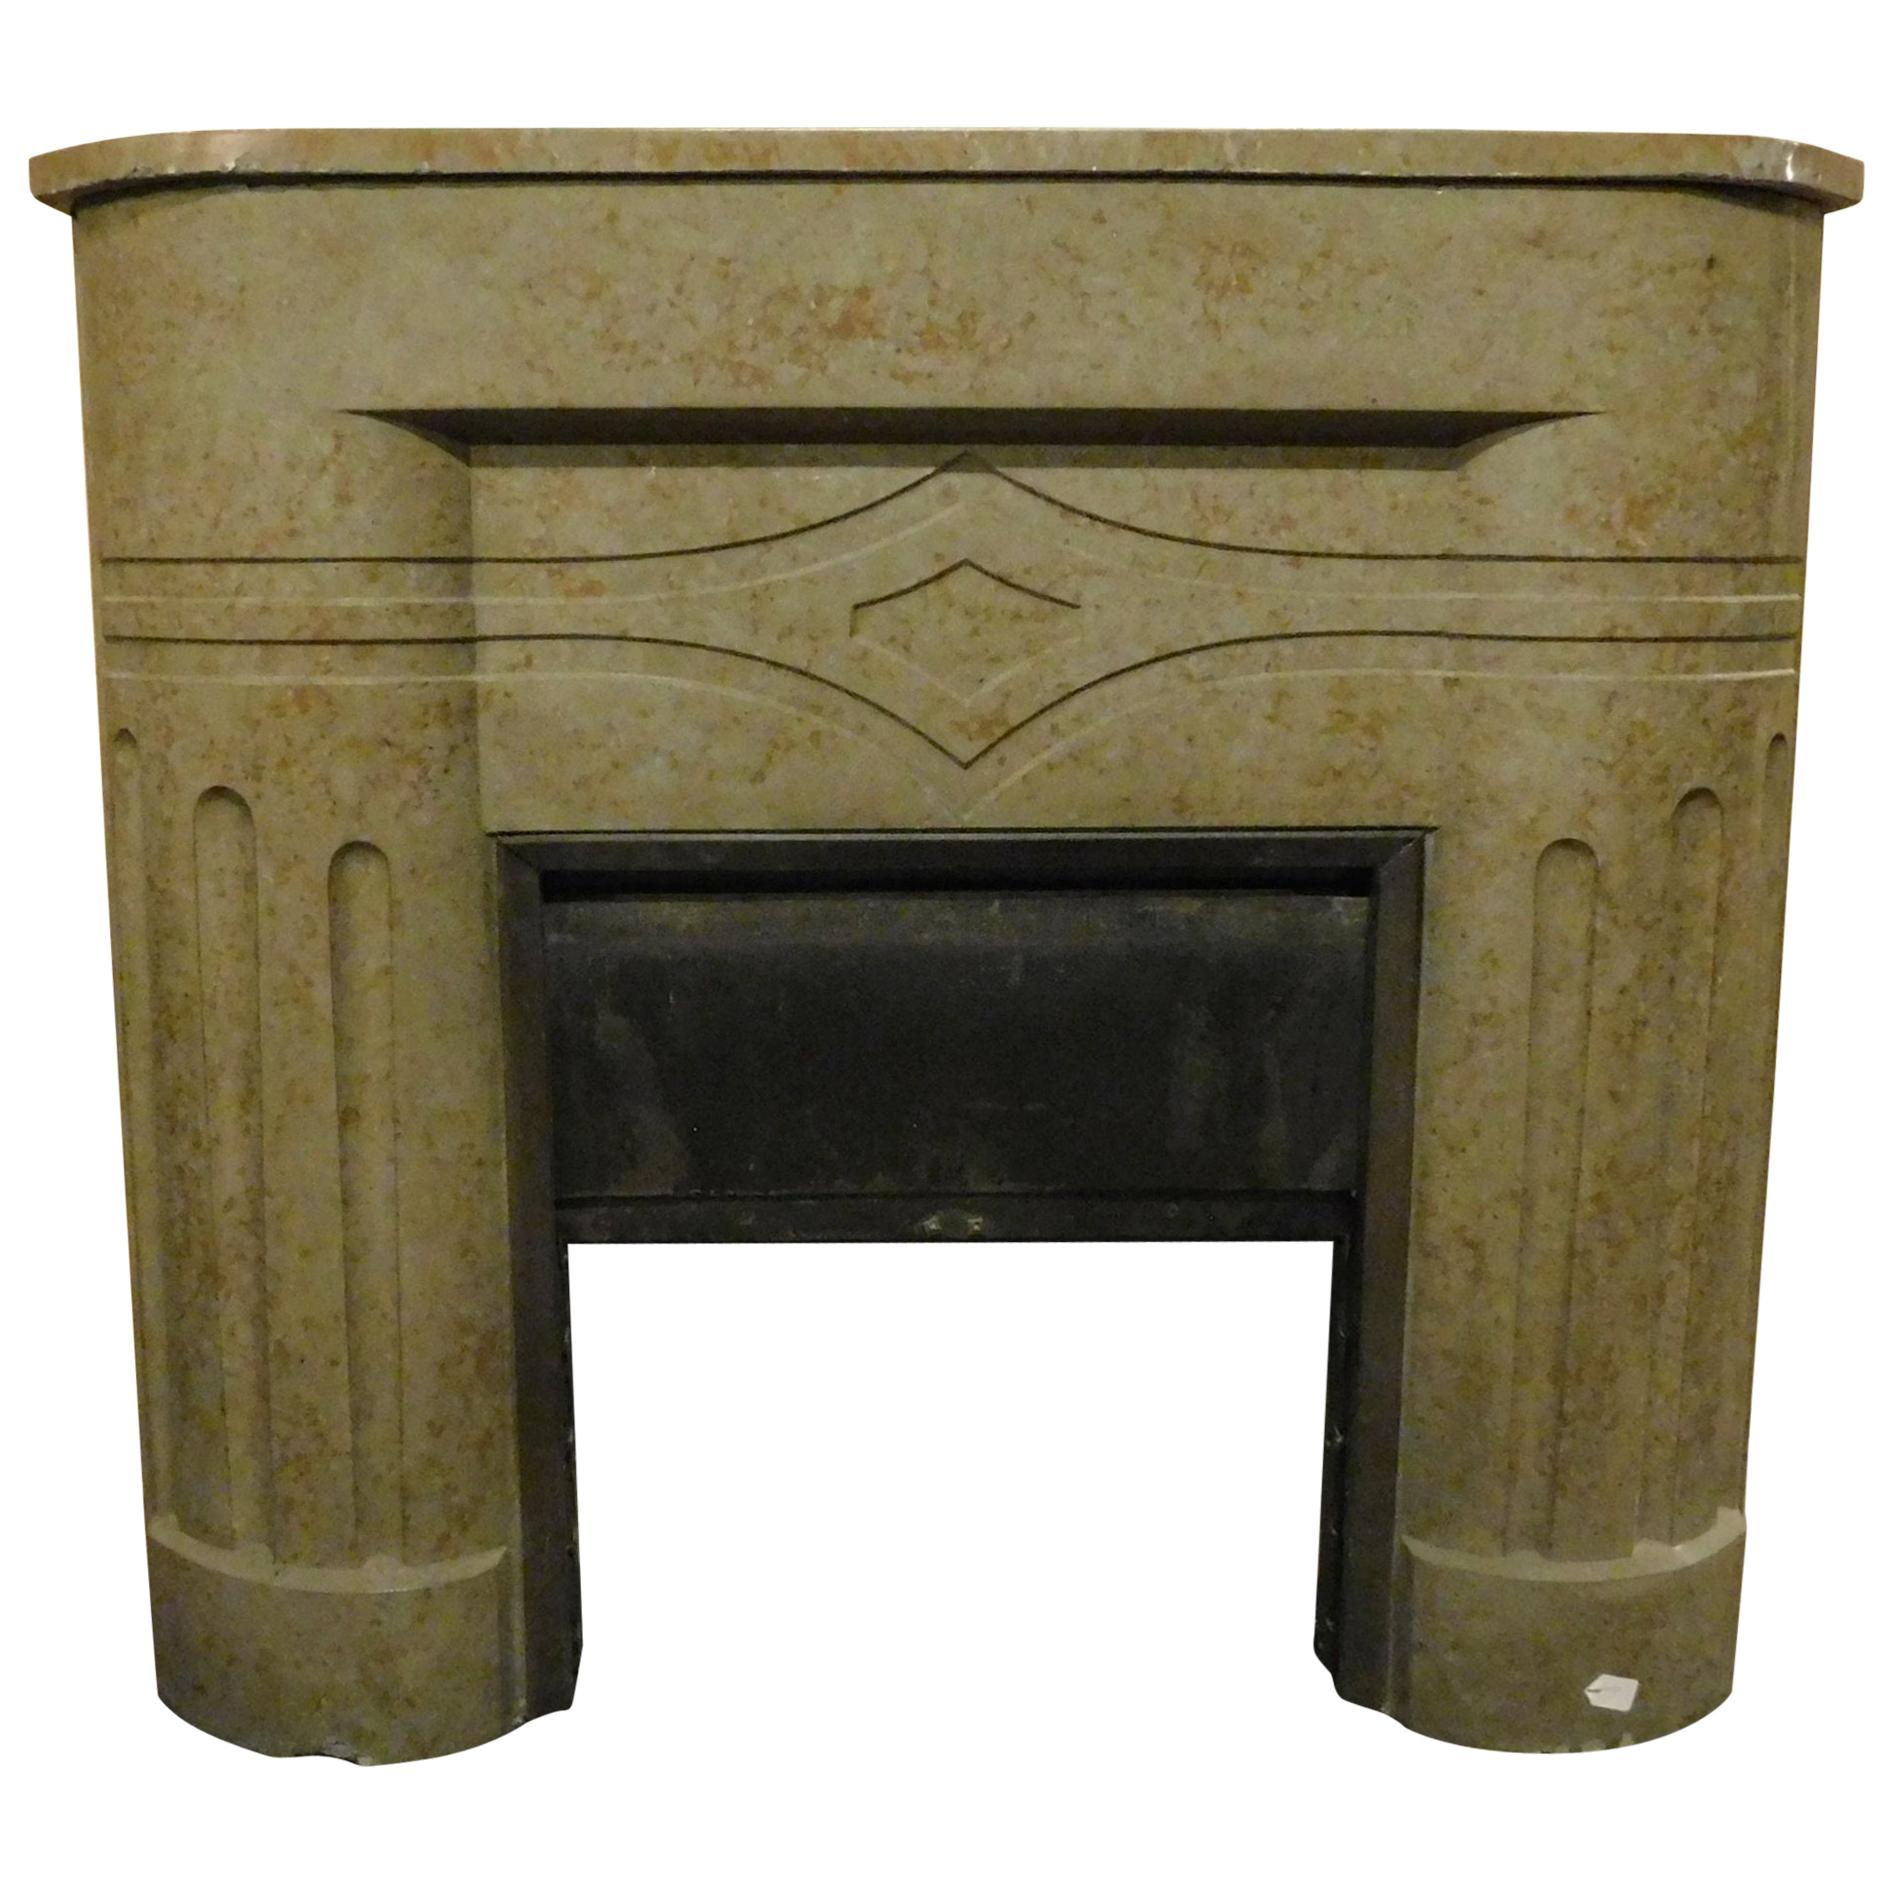 Vintage Marble Mantle Fireplace, Deco Style, Dove Gray Color, 1920, Italy